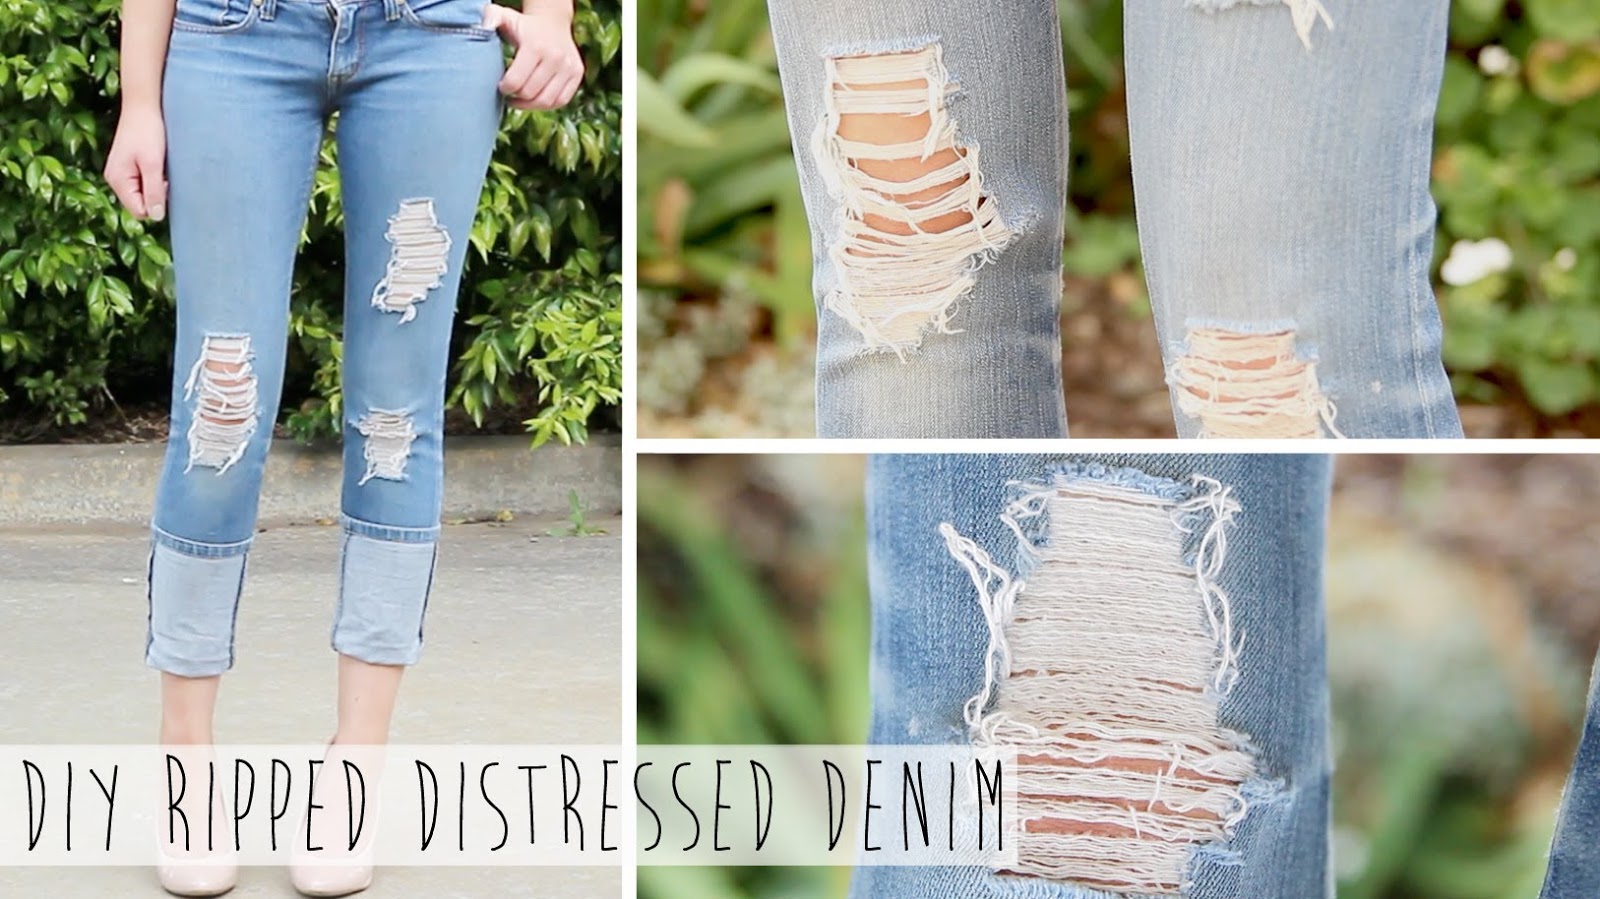 65 Mind-blowing Repurposing Projects For DIY Jeans - Craftsonfire